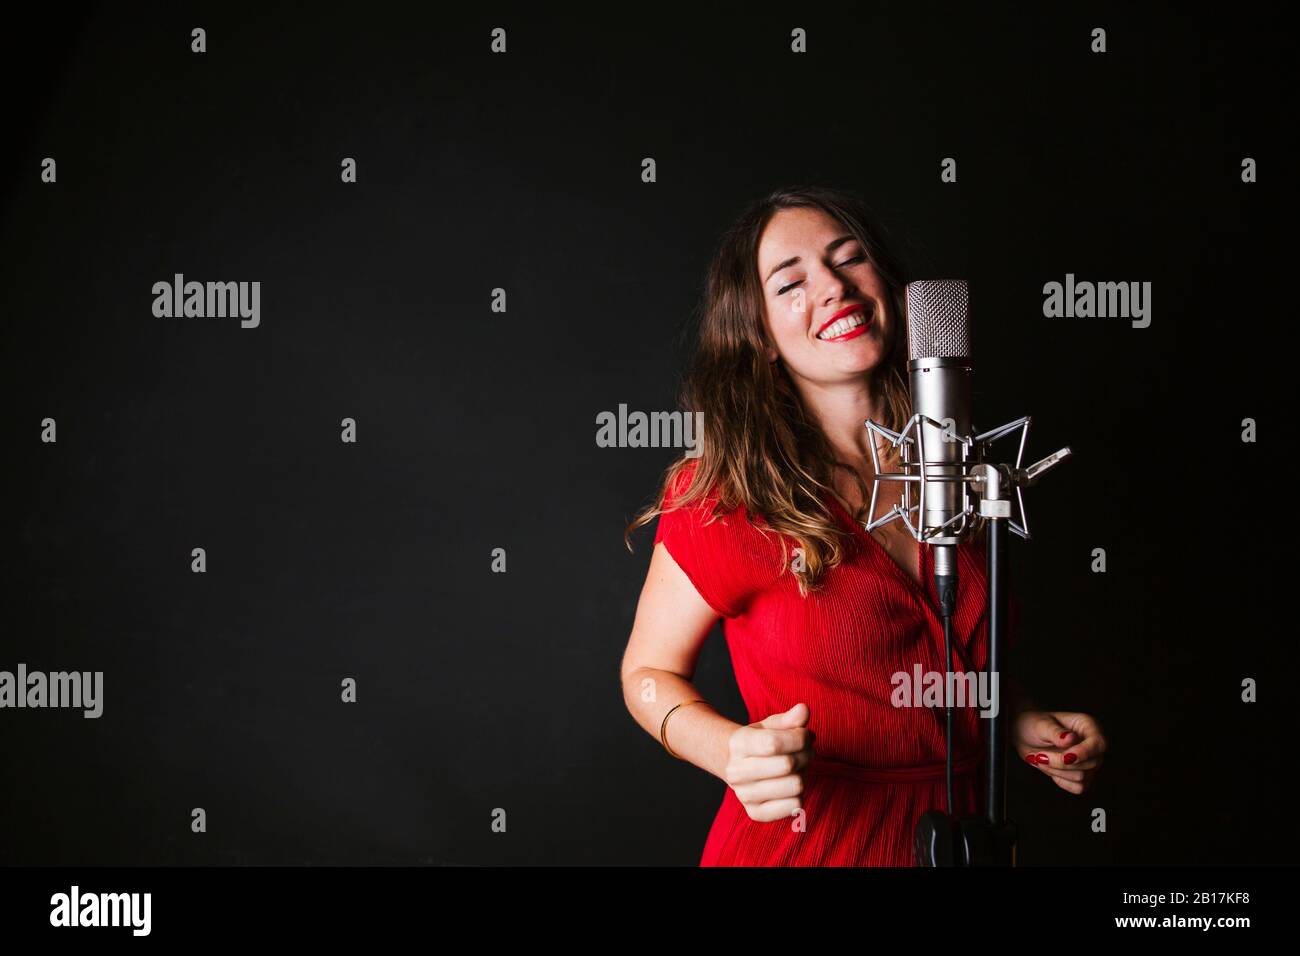 Portrait of female singer with microphone, wearing red dress Stock Photo